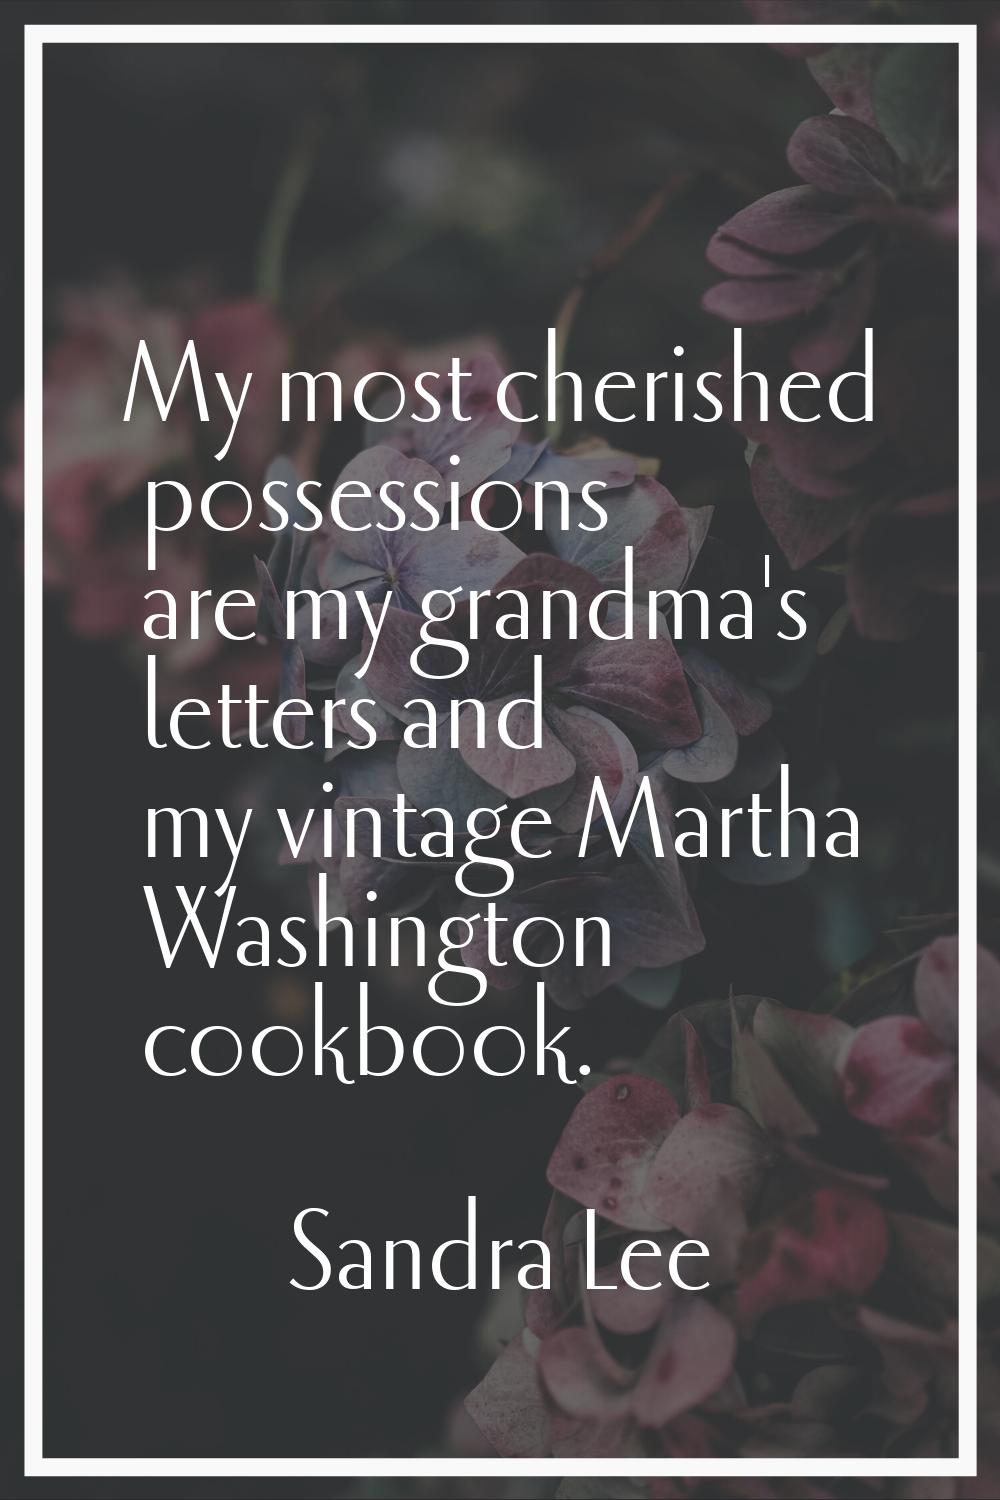 My most cherished possessions are my grandma's letters and my vintage Martha Washington cookbook.